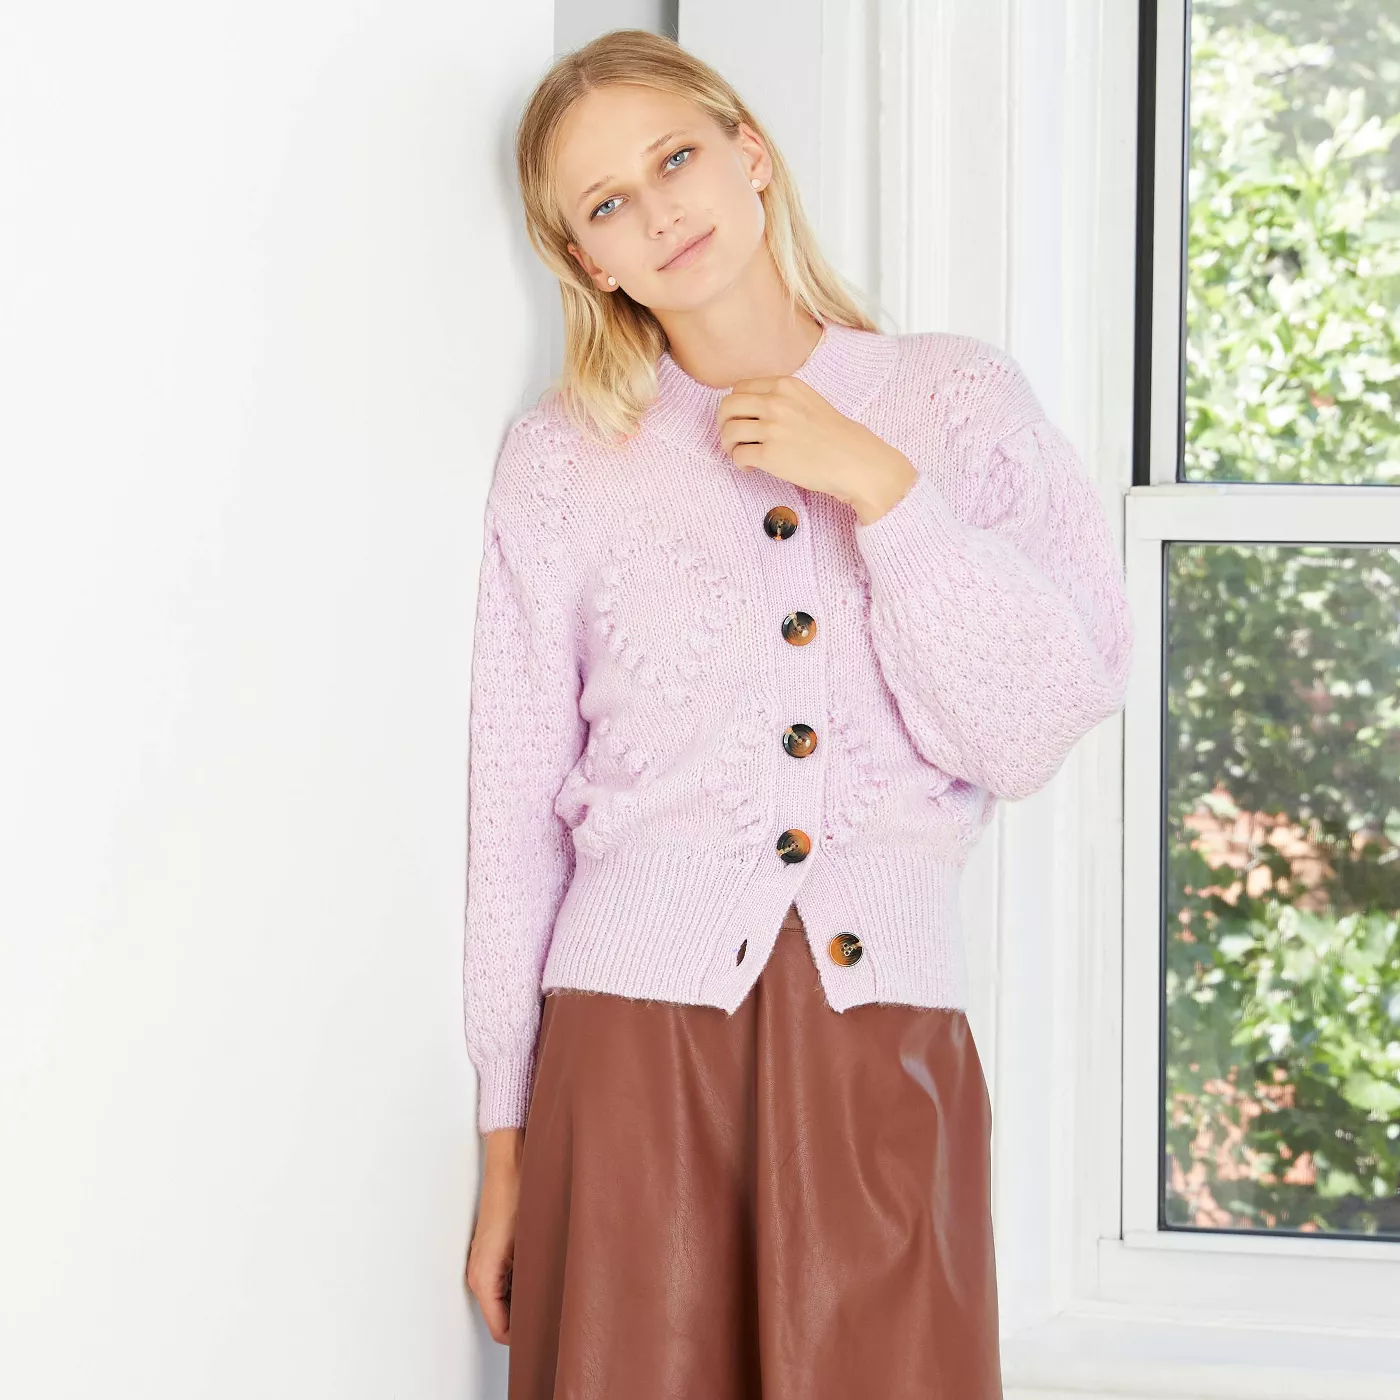 Women's Cardigan - Who What Wear™ - image 1 of 11